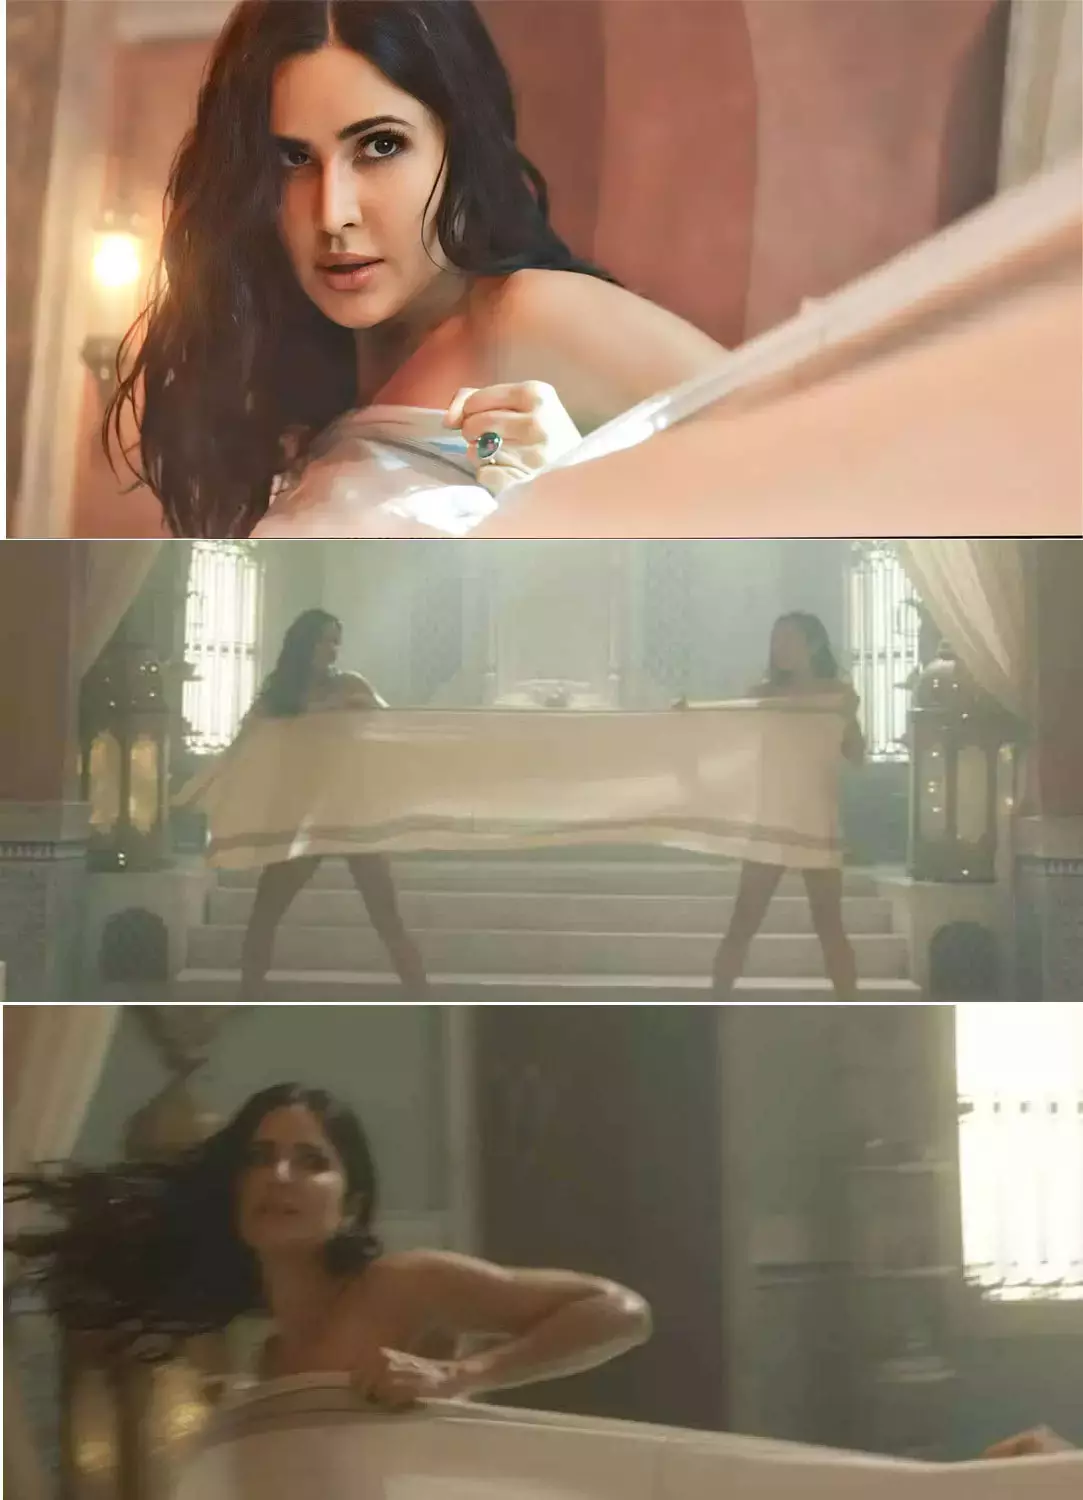 dj shirley recommends katrina kaif nude pictures pic